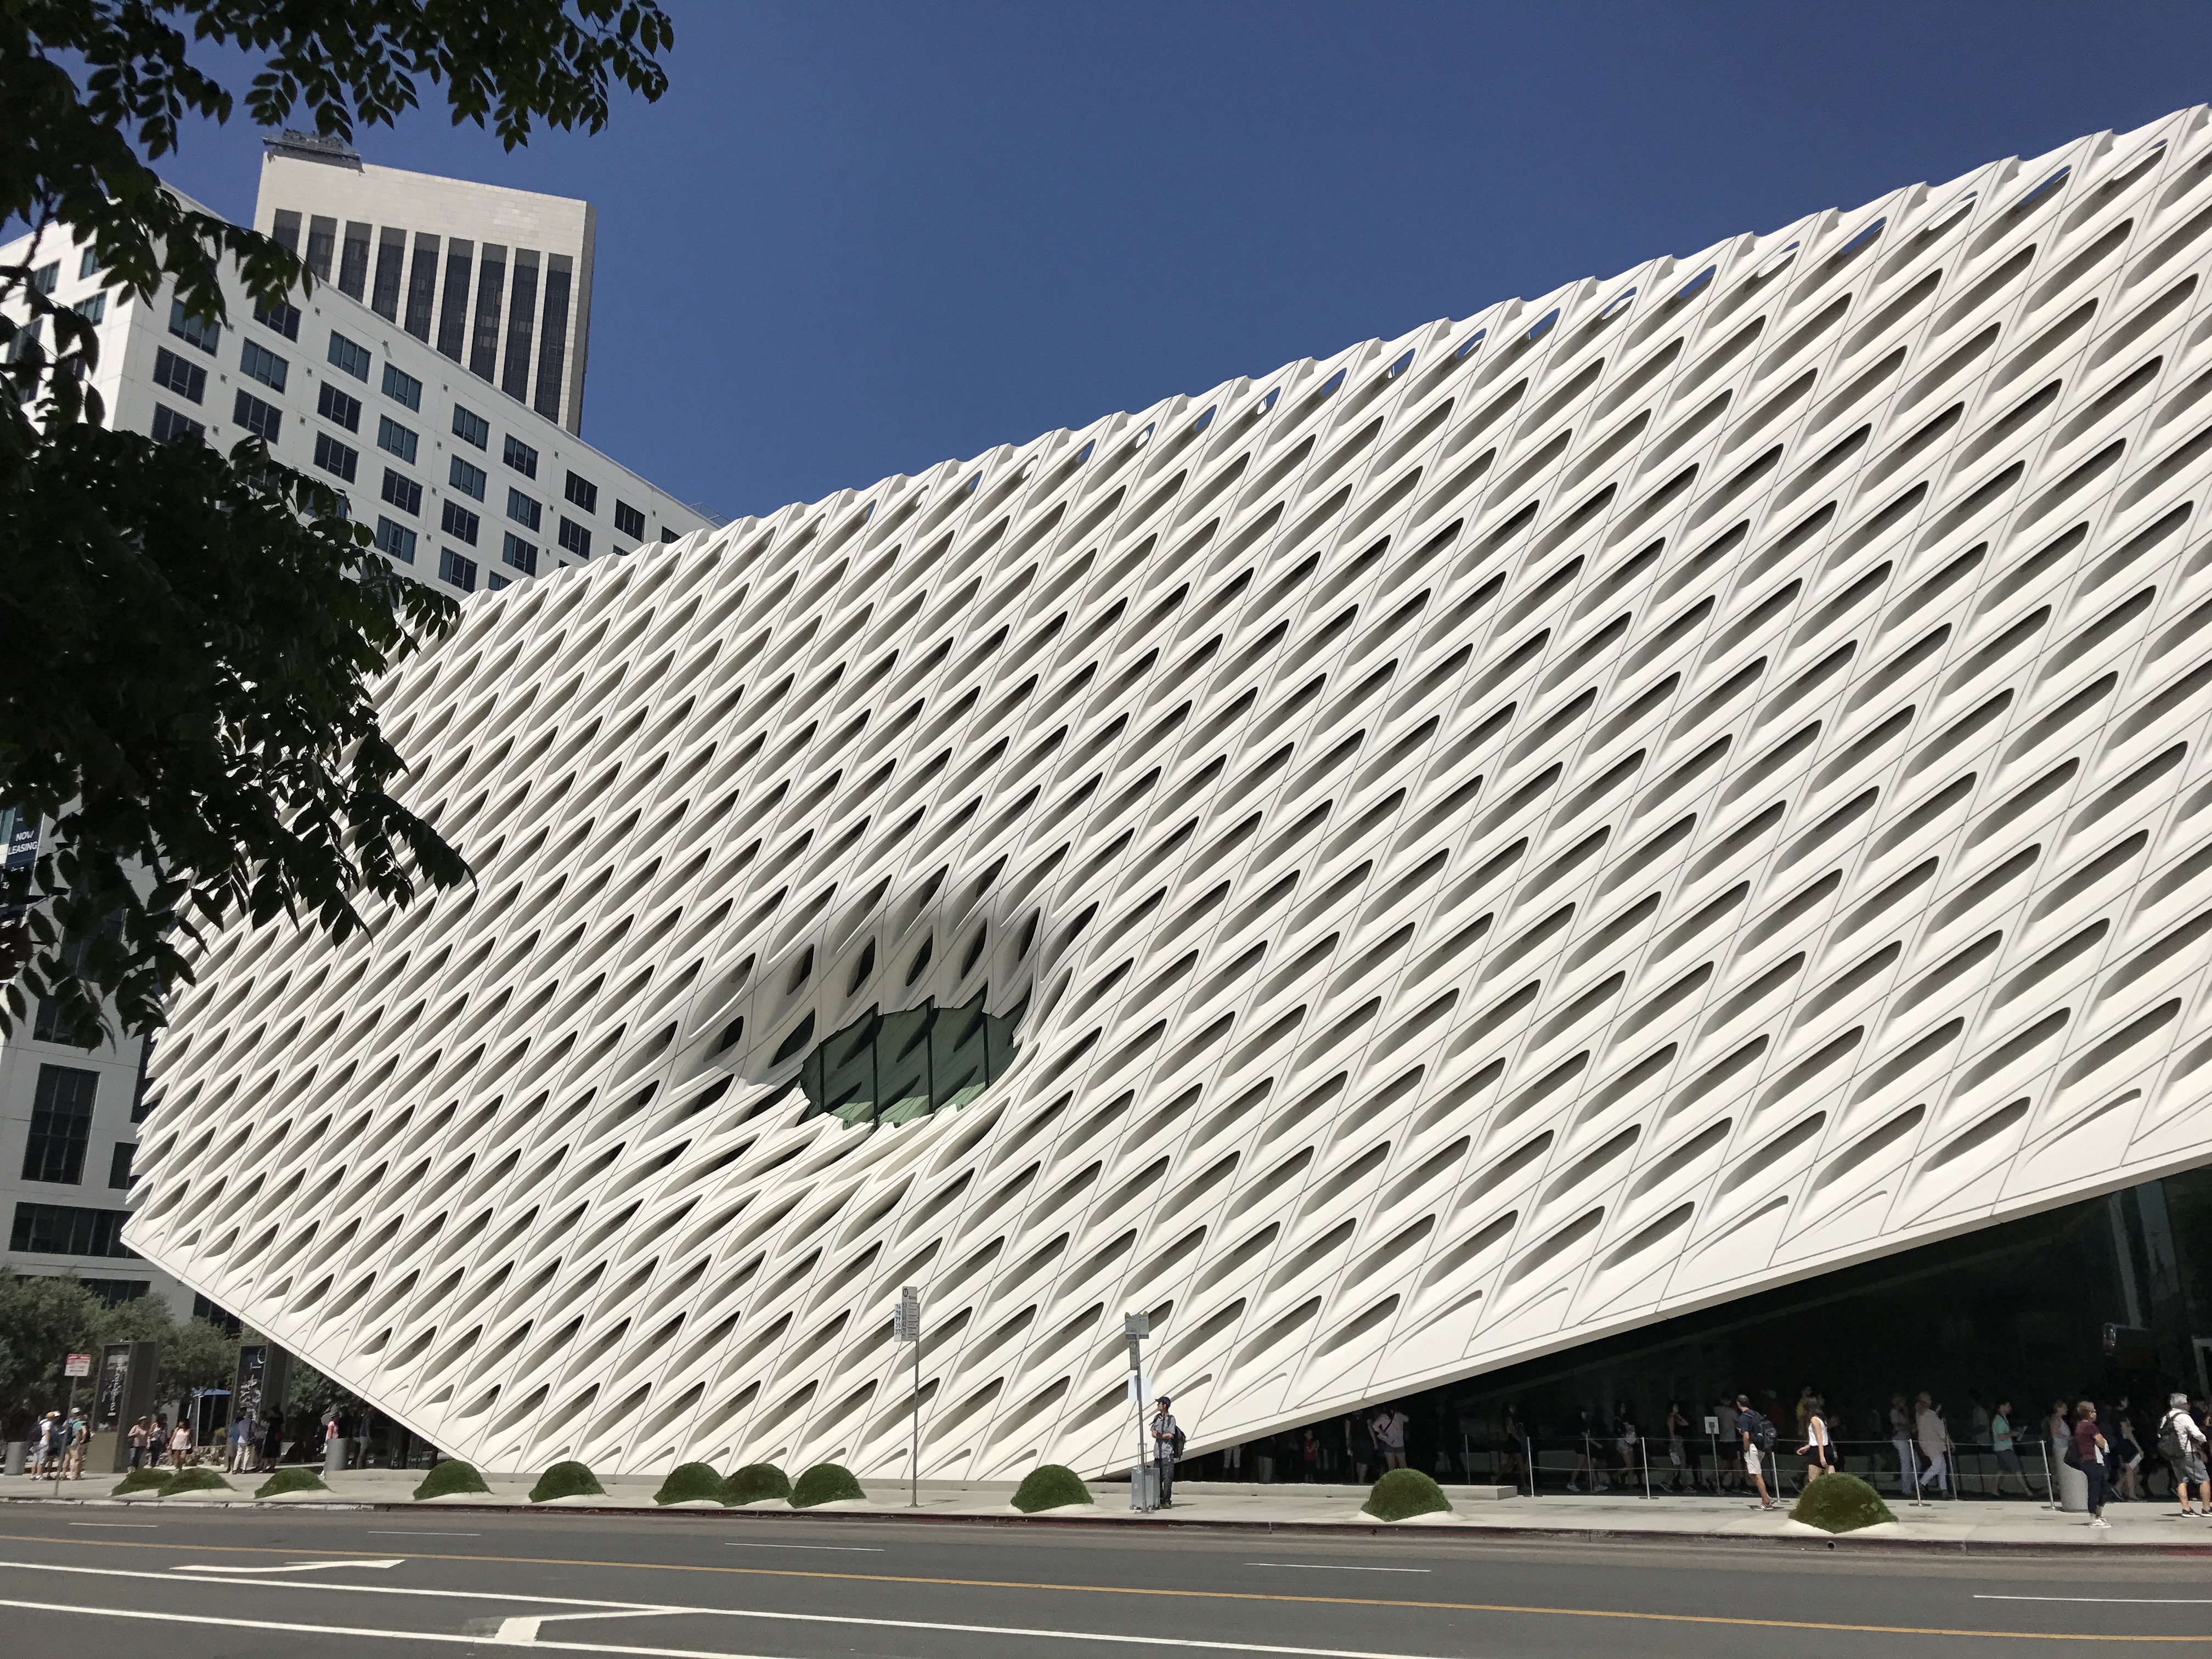 The Broad - we couldn't get in because of queues, but it looks cool